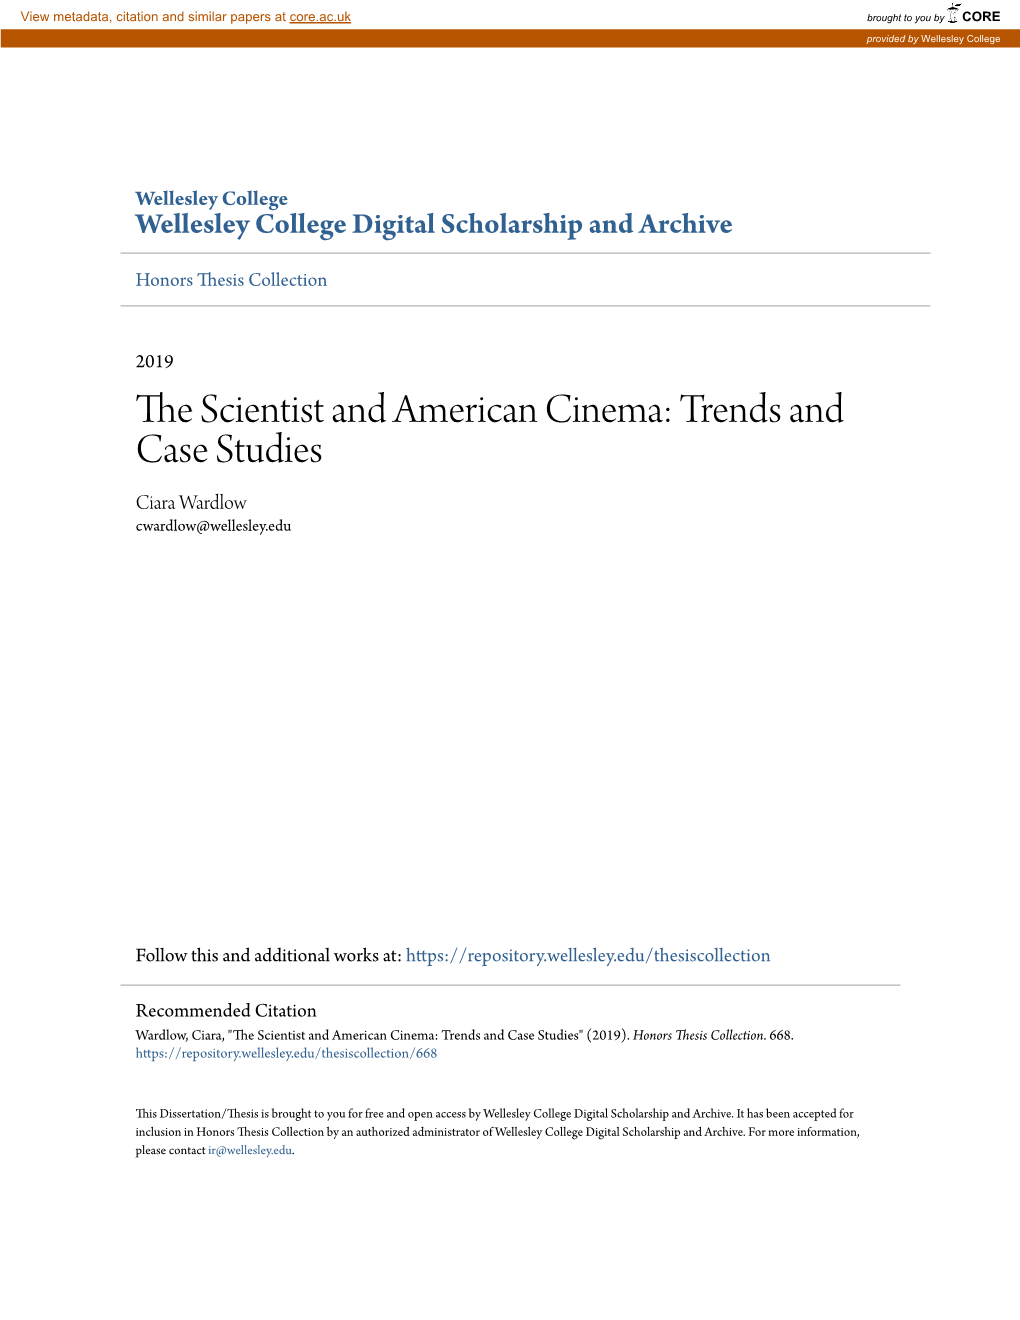 The Scientist and American Cinema: Trends and Case Studies